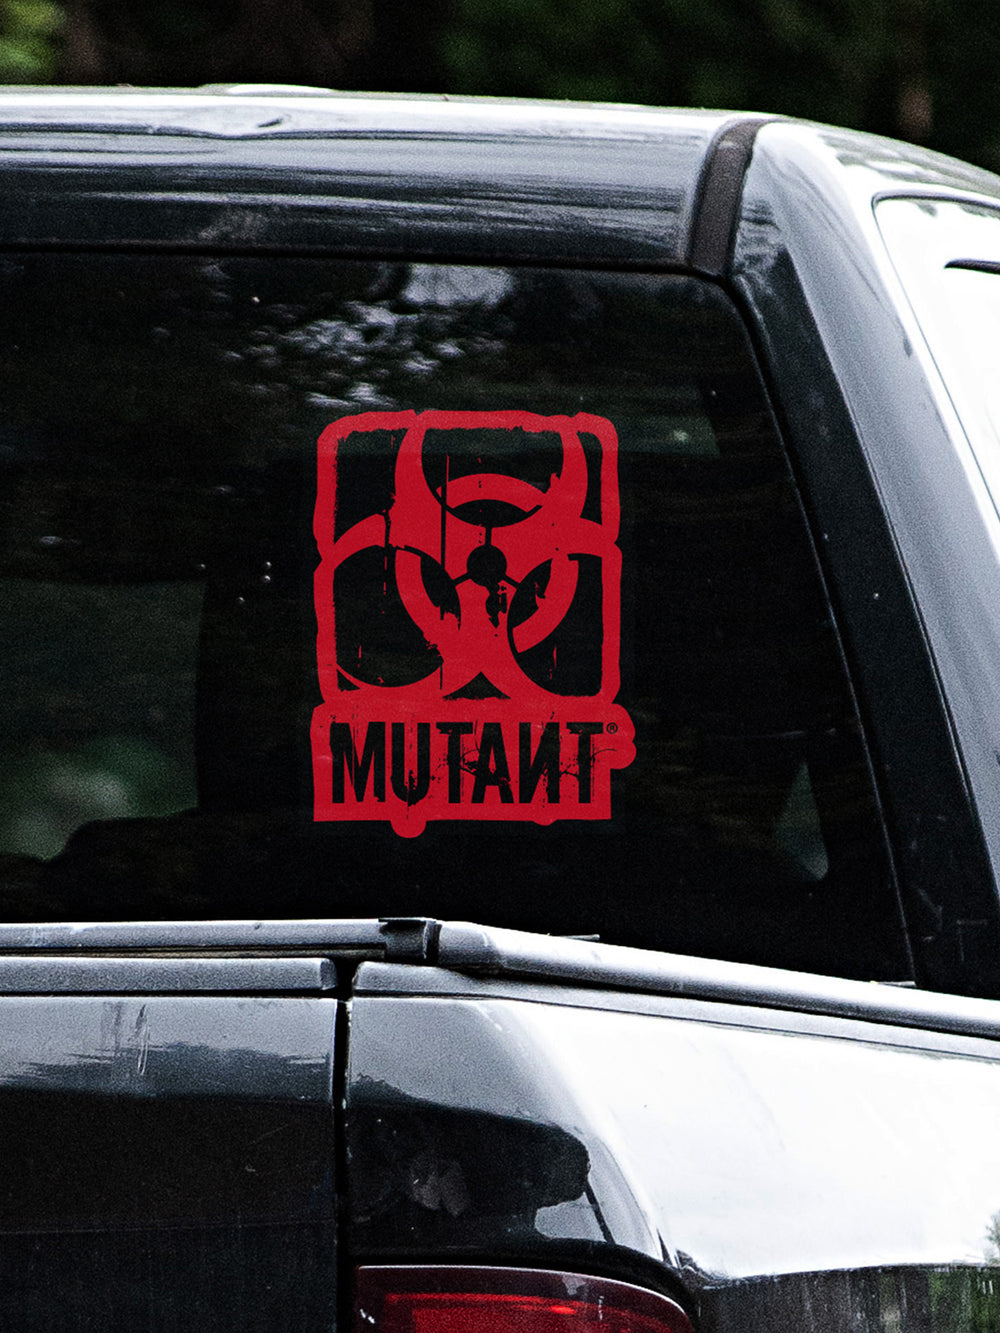 A photo showing the Rugged Truck Window Decal, which features the MUTANT logo in red on a shaped black background, applied to the rear glass of a truck.